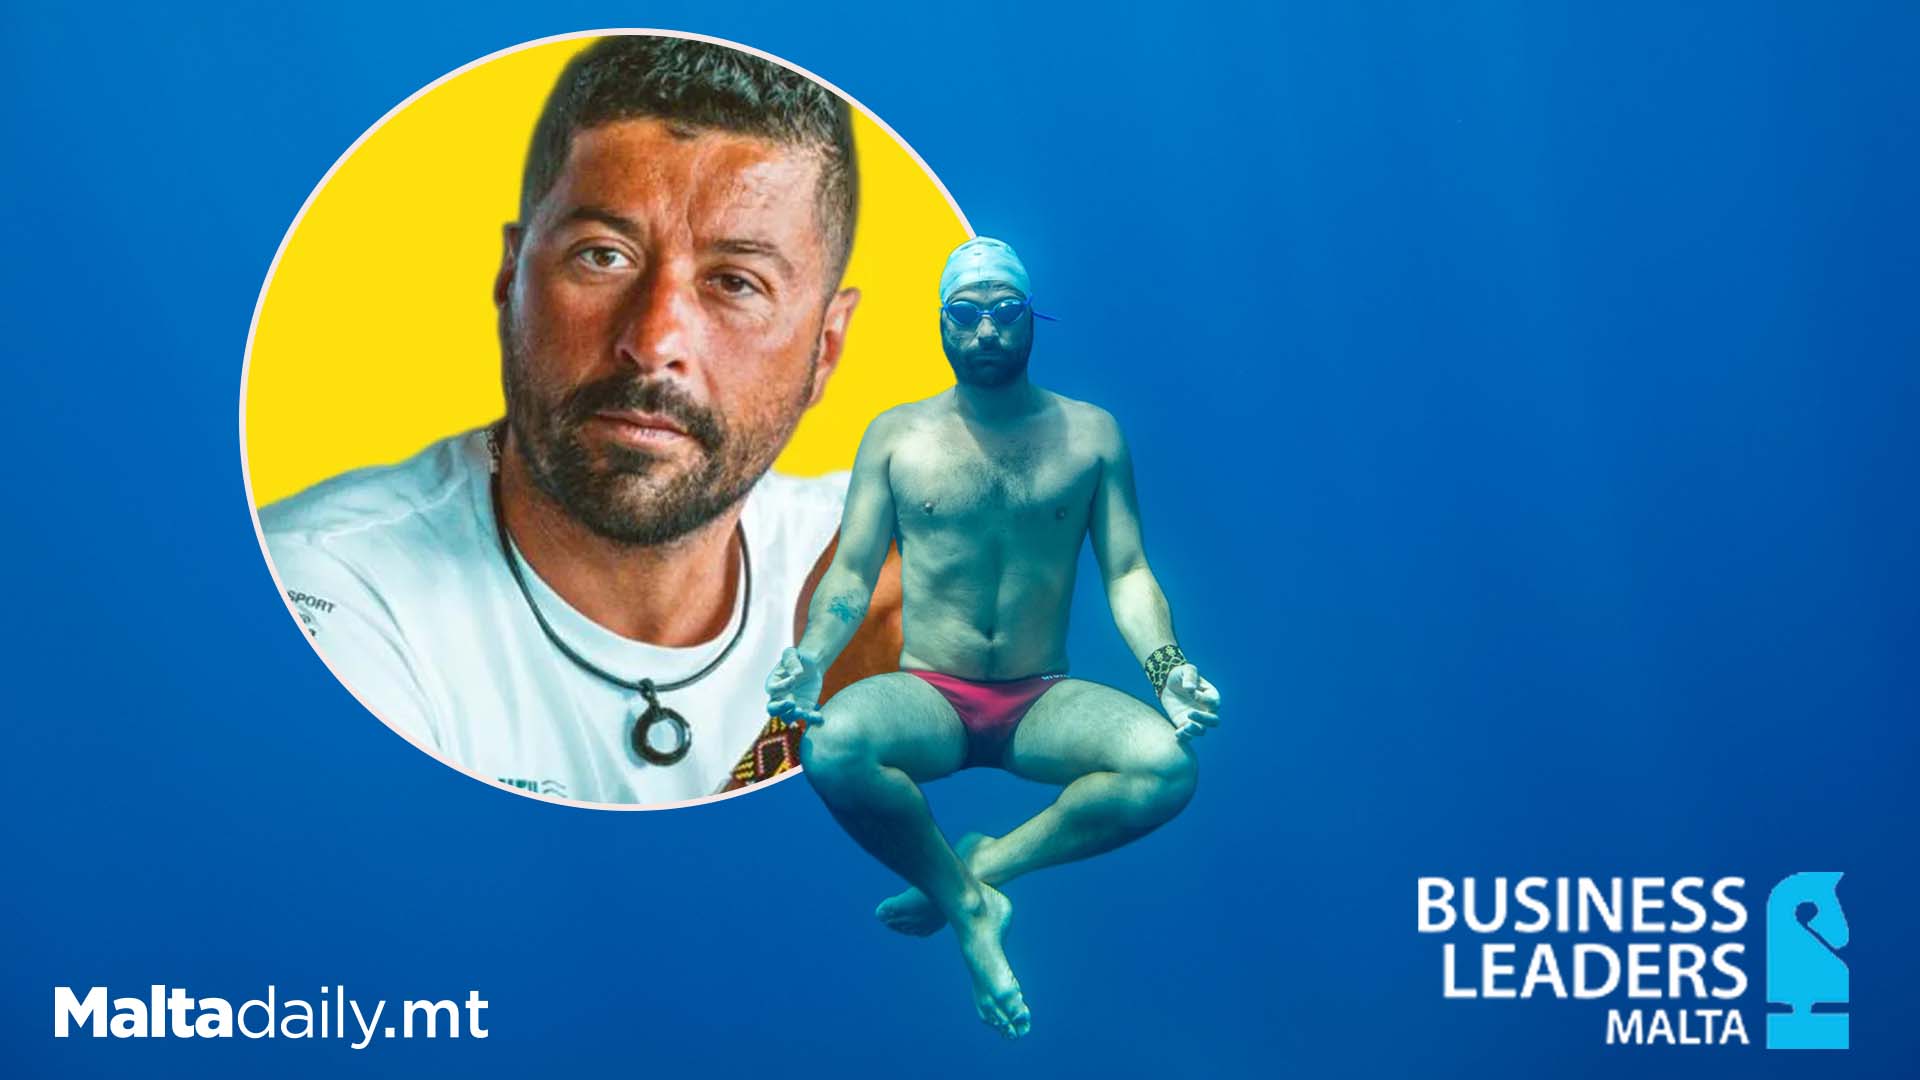 Neil Agius To Speak At The Business Leaders Malta Conference